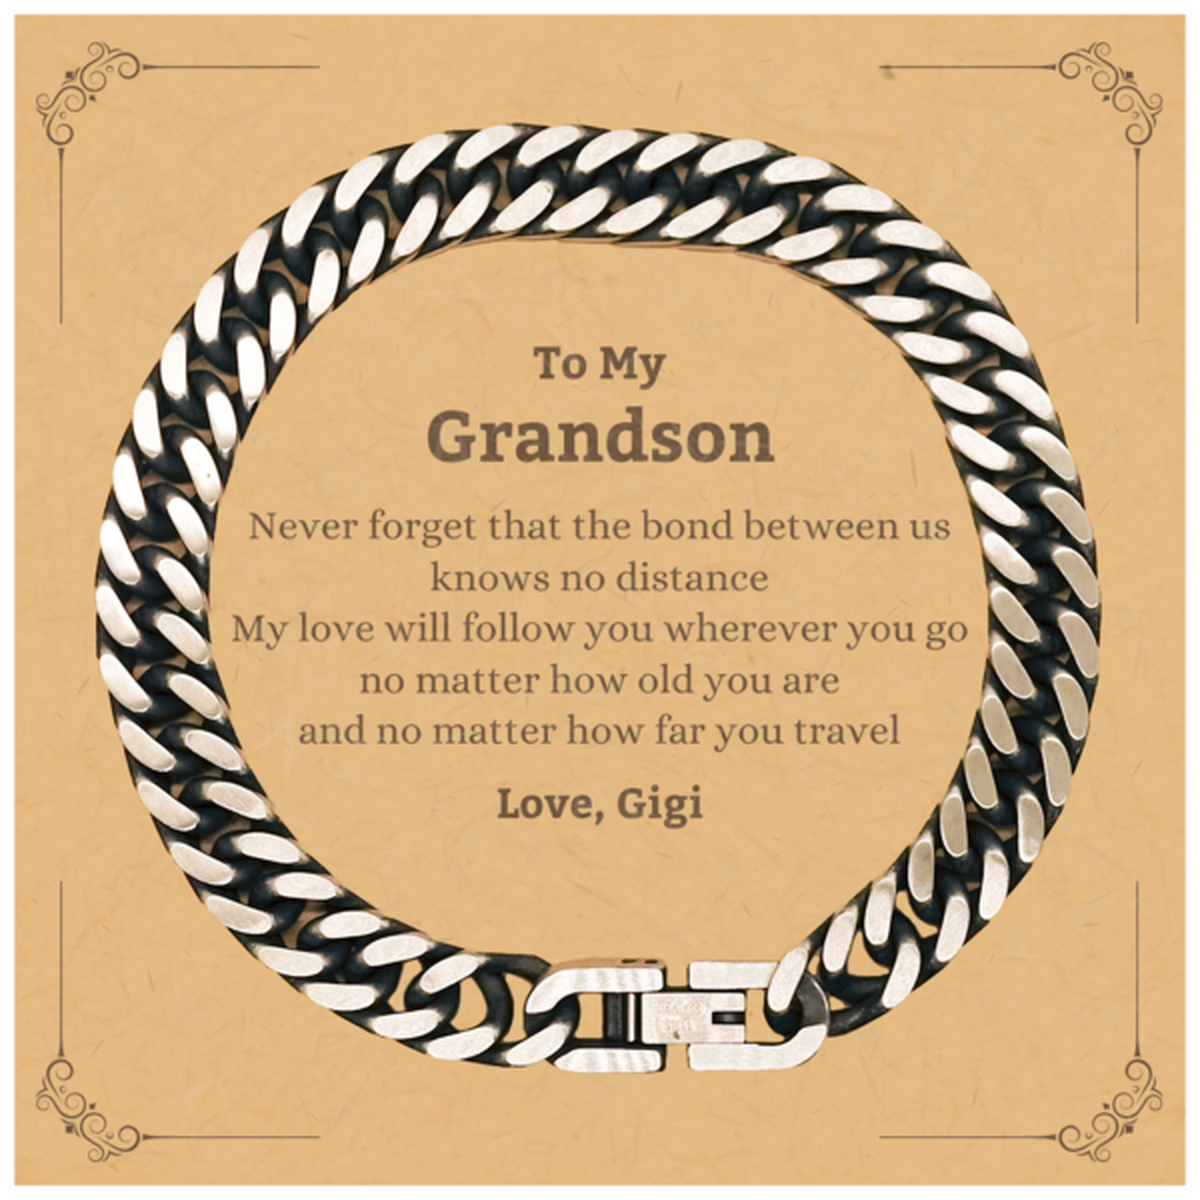 Grandson Birthday Gifts from Gigi, Adjustable Cuban Link Chain Bracelet for Grandson Christmas Graduation Unique Gifts Grandson Never forget that the bond between us knows no distance. Love, Gigi